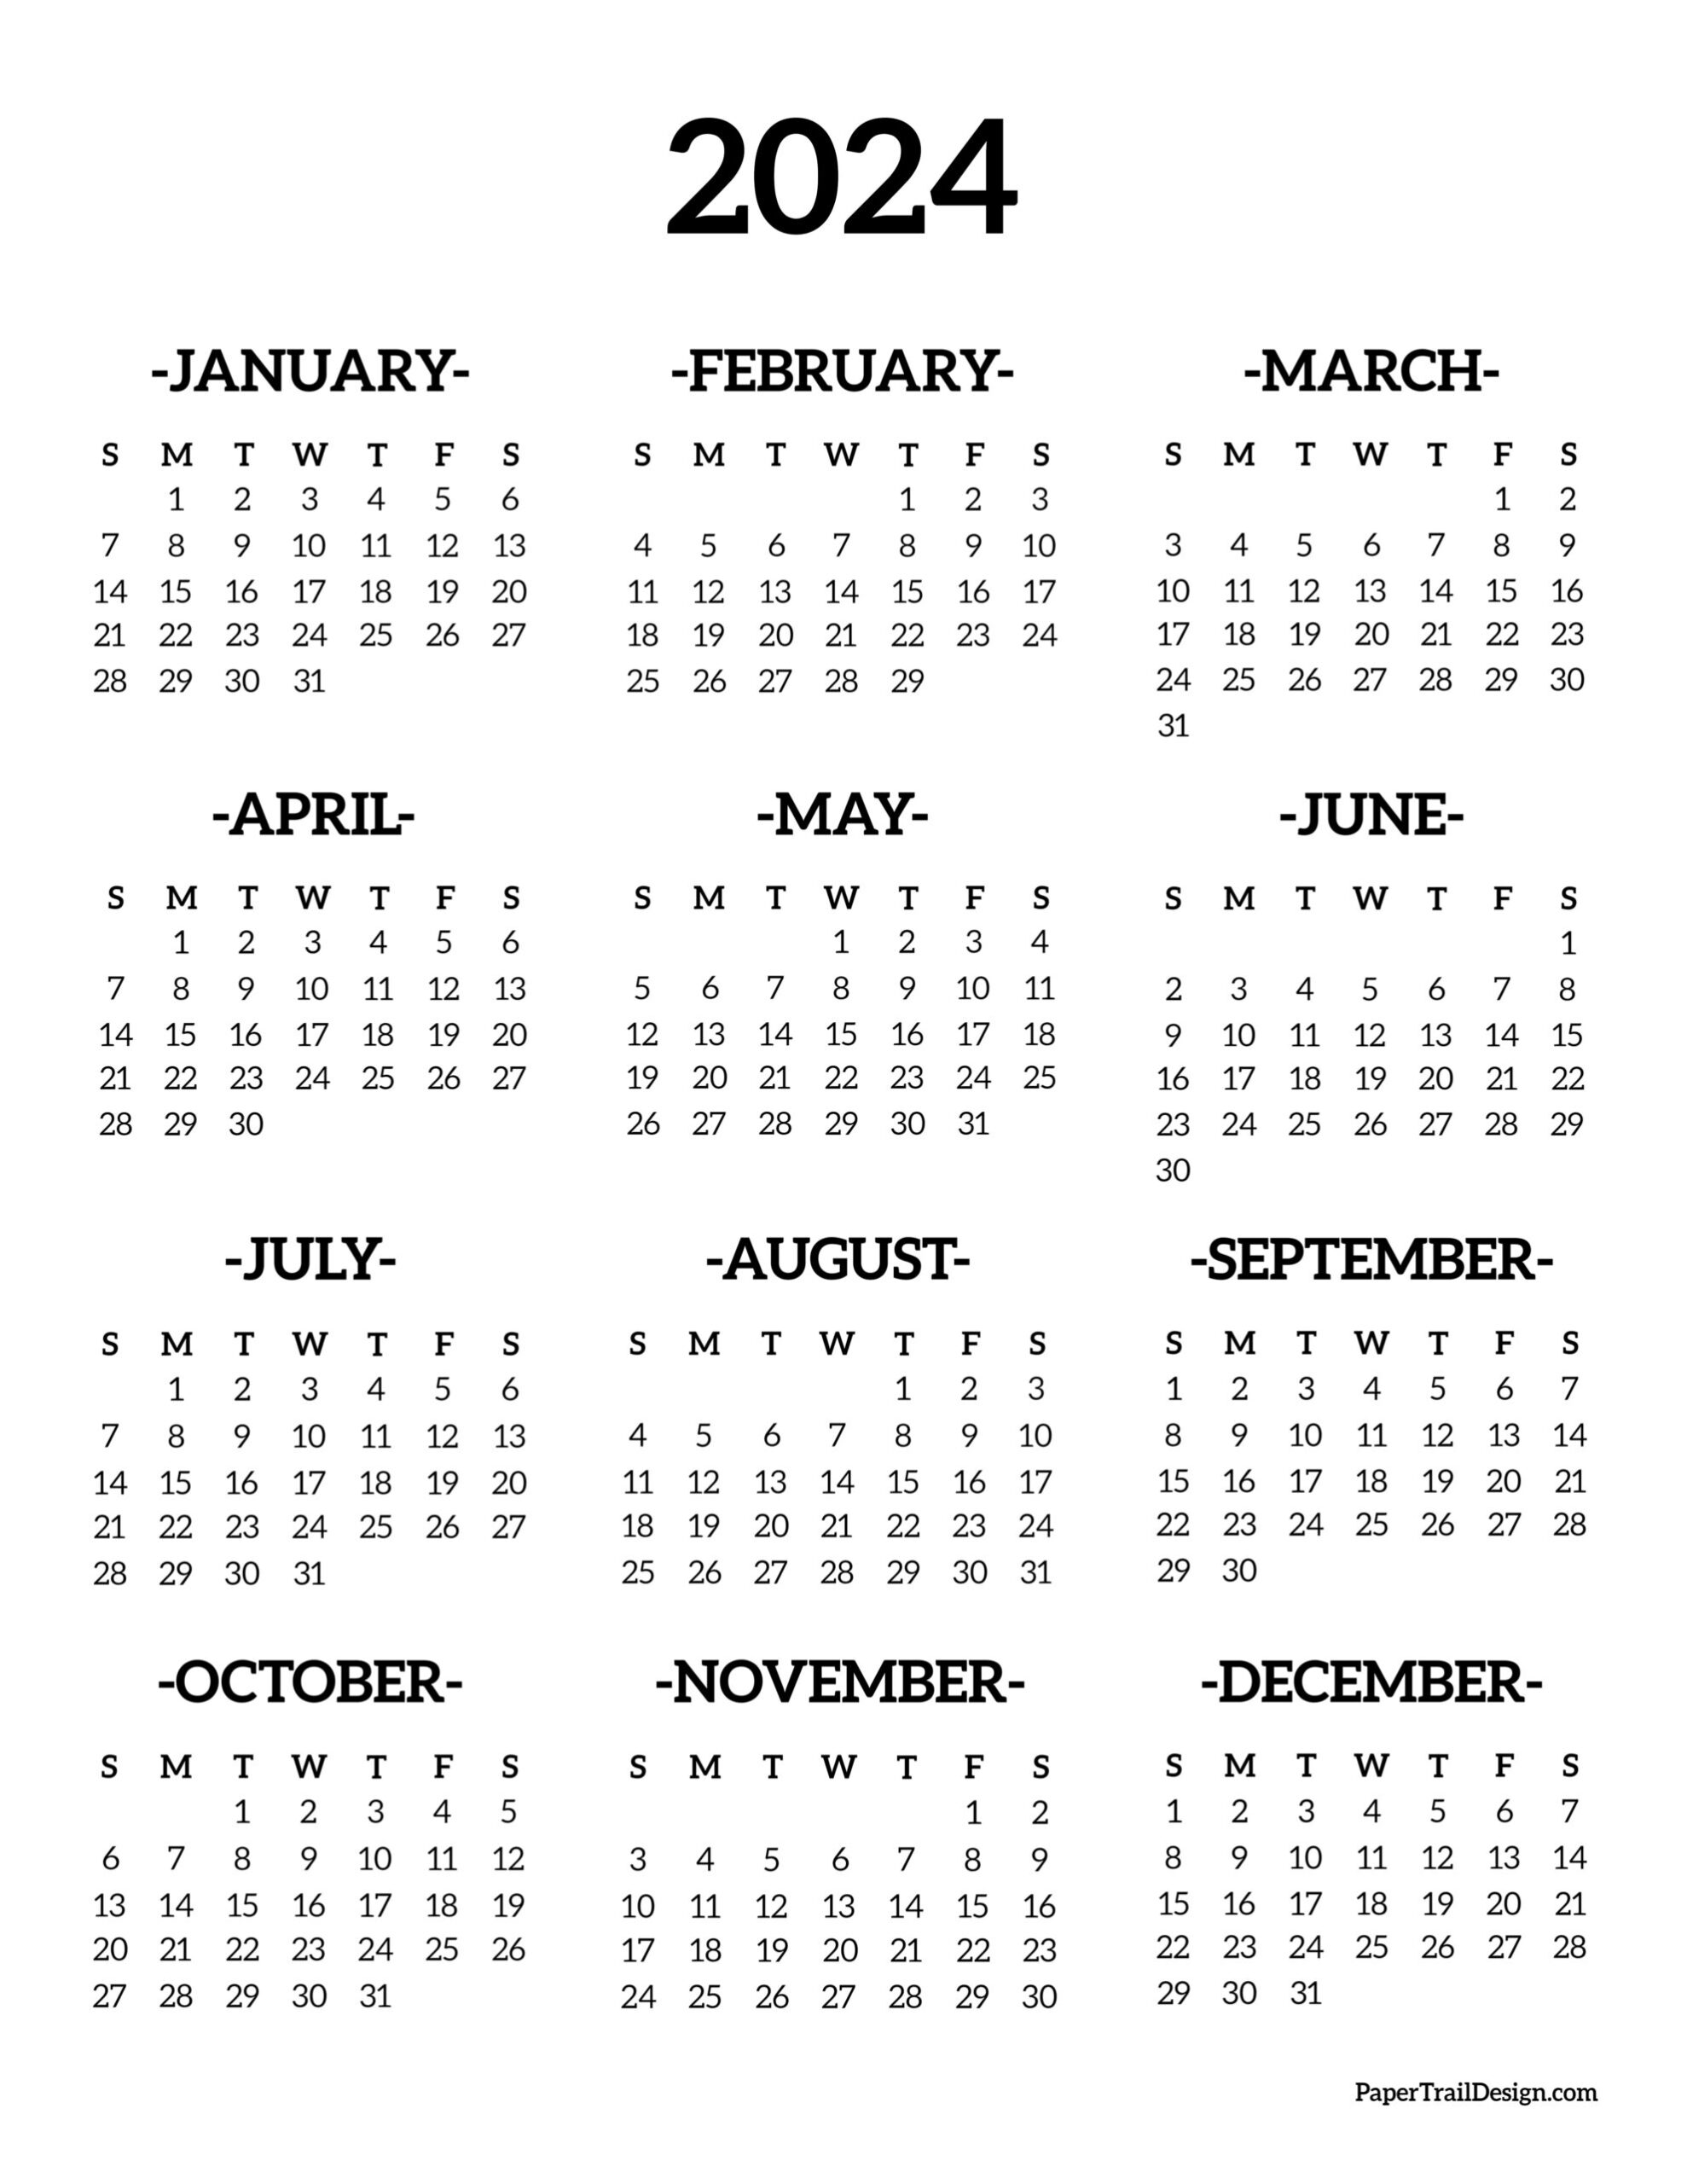 Calendar 2024 Printable One Page - Paper Trail Design for 2024 Year Printable Calendar